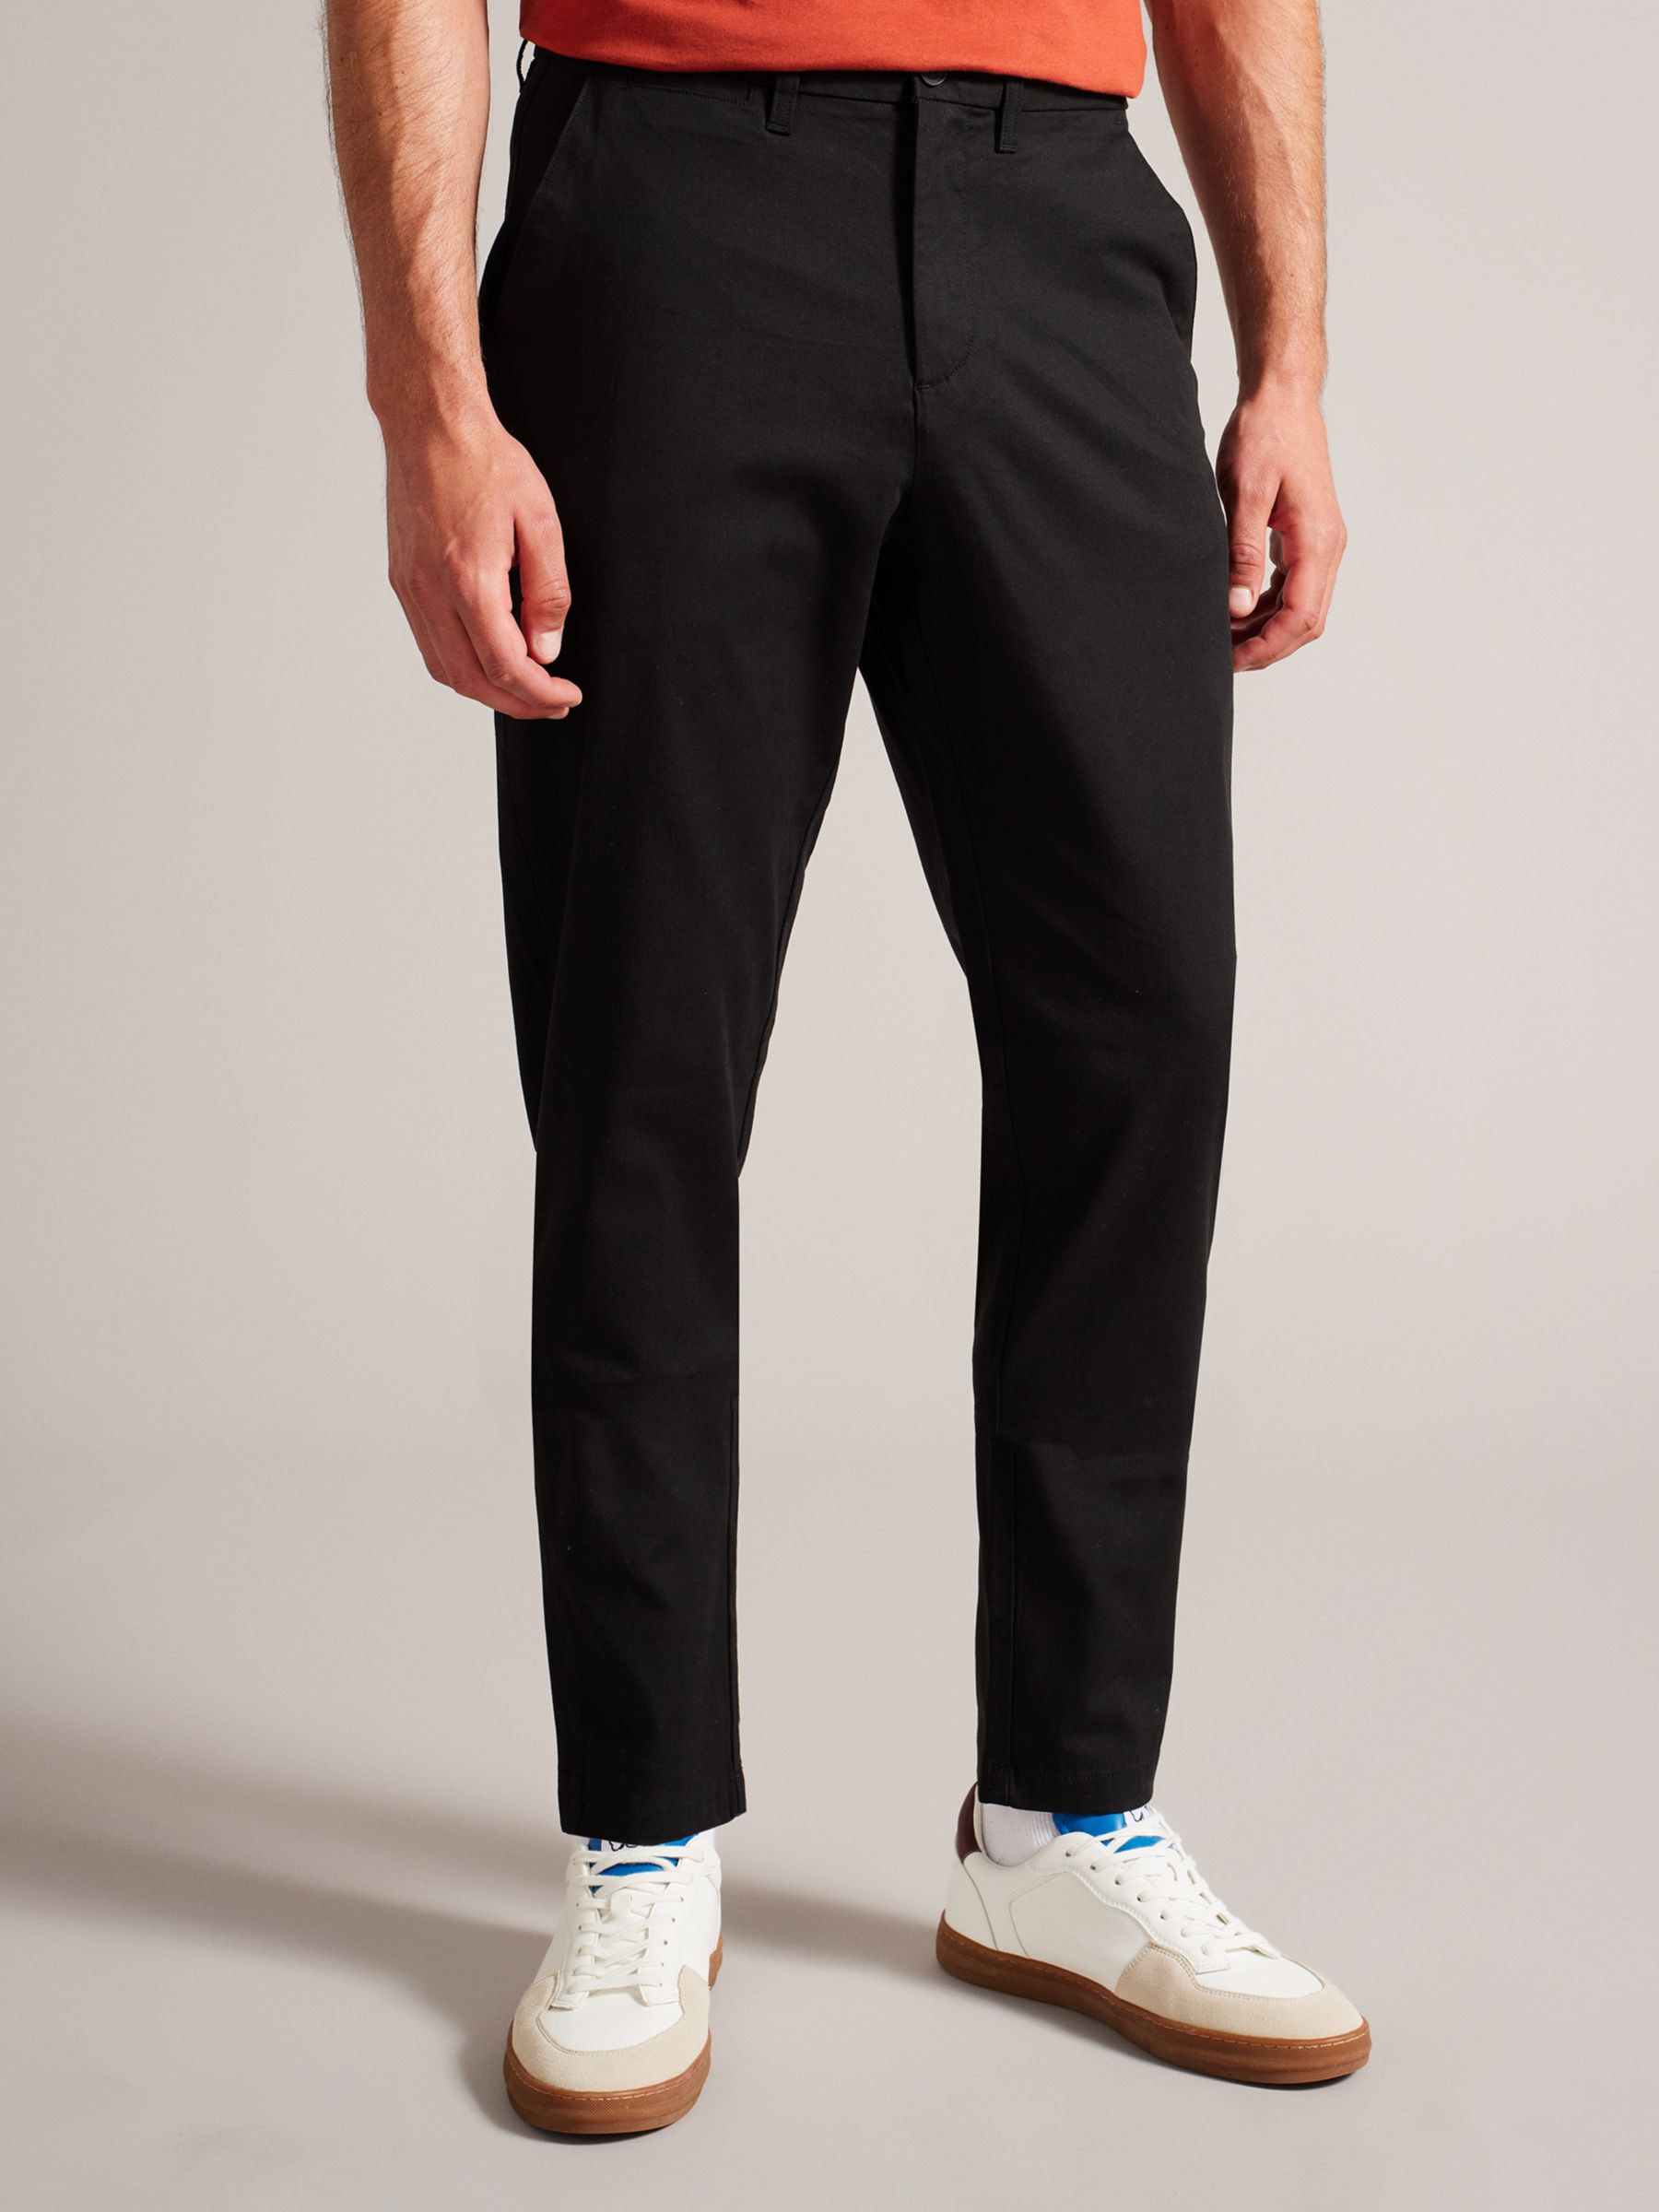 Ted Baker Haybrn Blue Navy Chino Trouser, Black at John Lewis & Partners